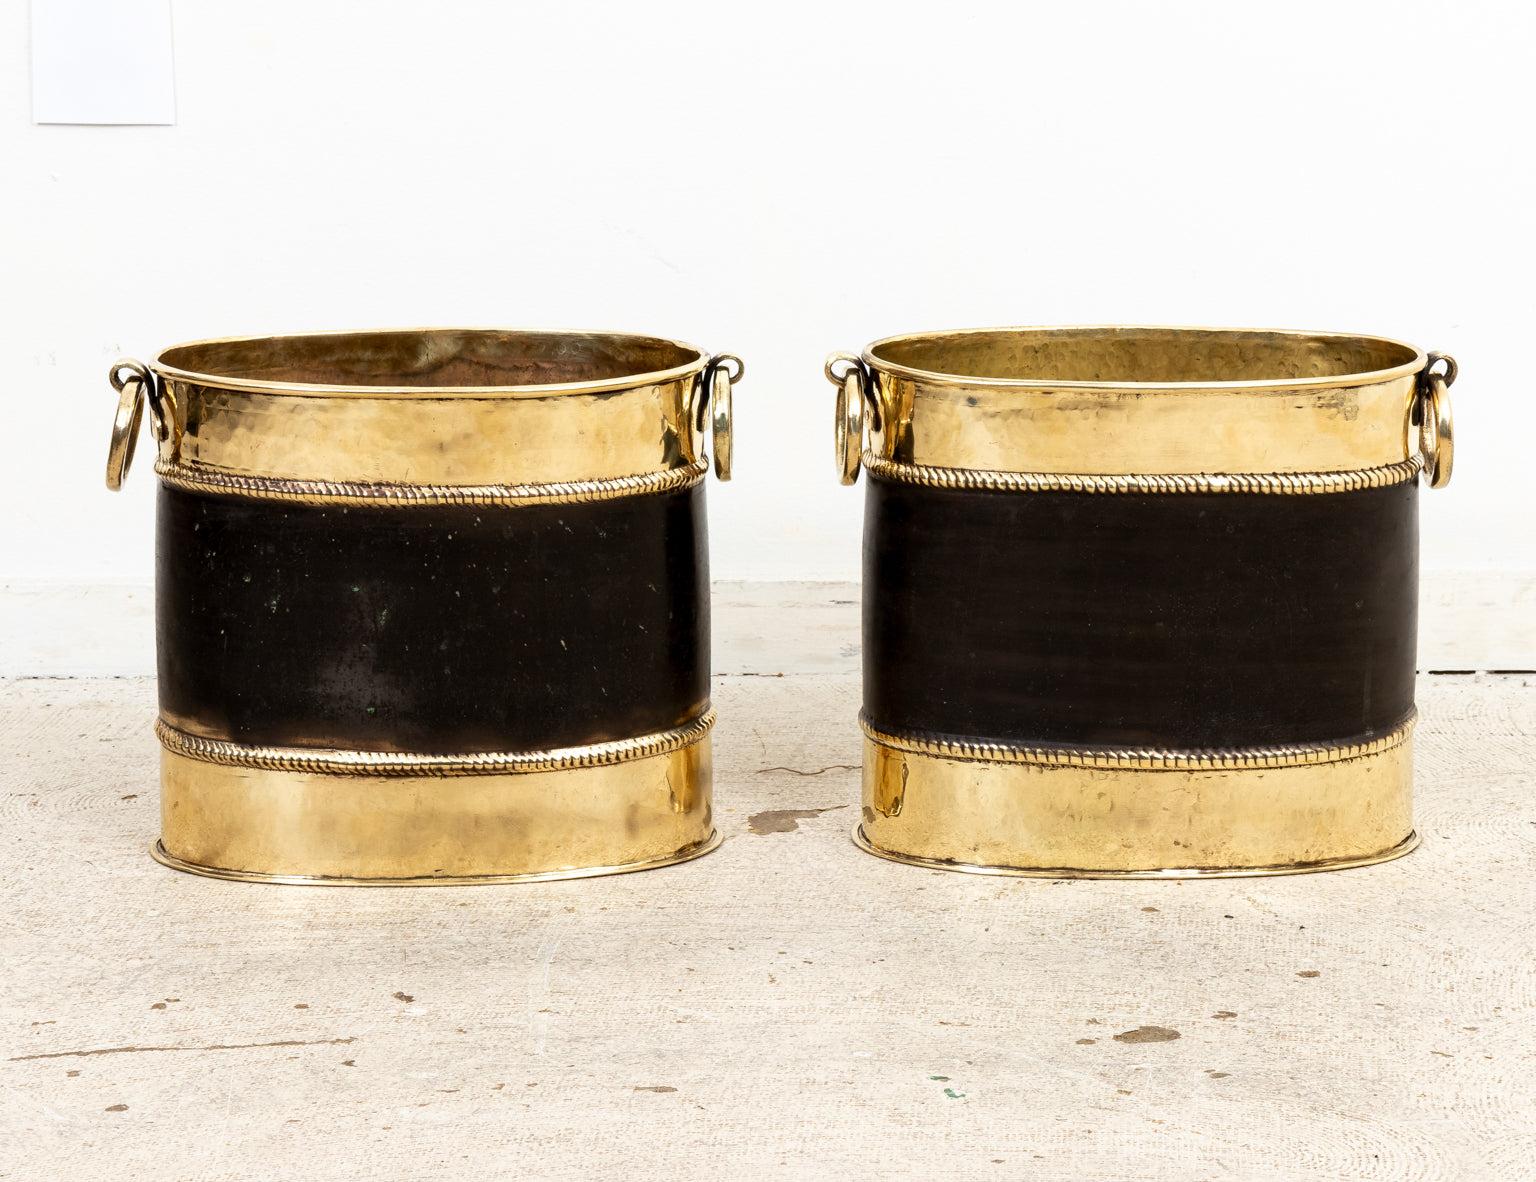 A pair of vintage Sarreid brass and black oval buckets with ring handles on the sides. See Sarreid label on the bottom. Wear consistent with age.